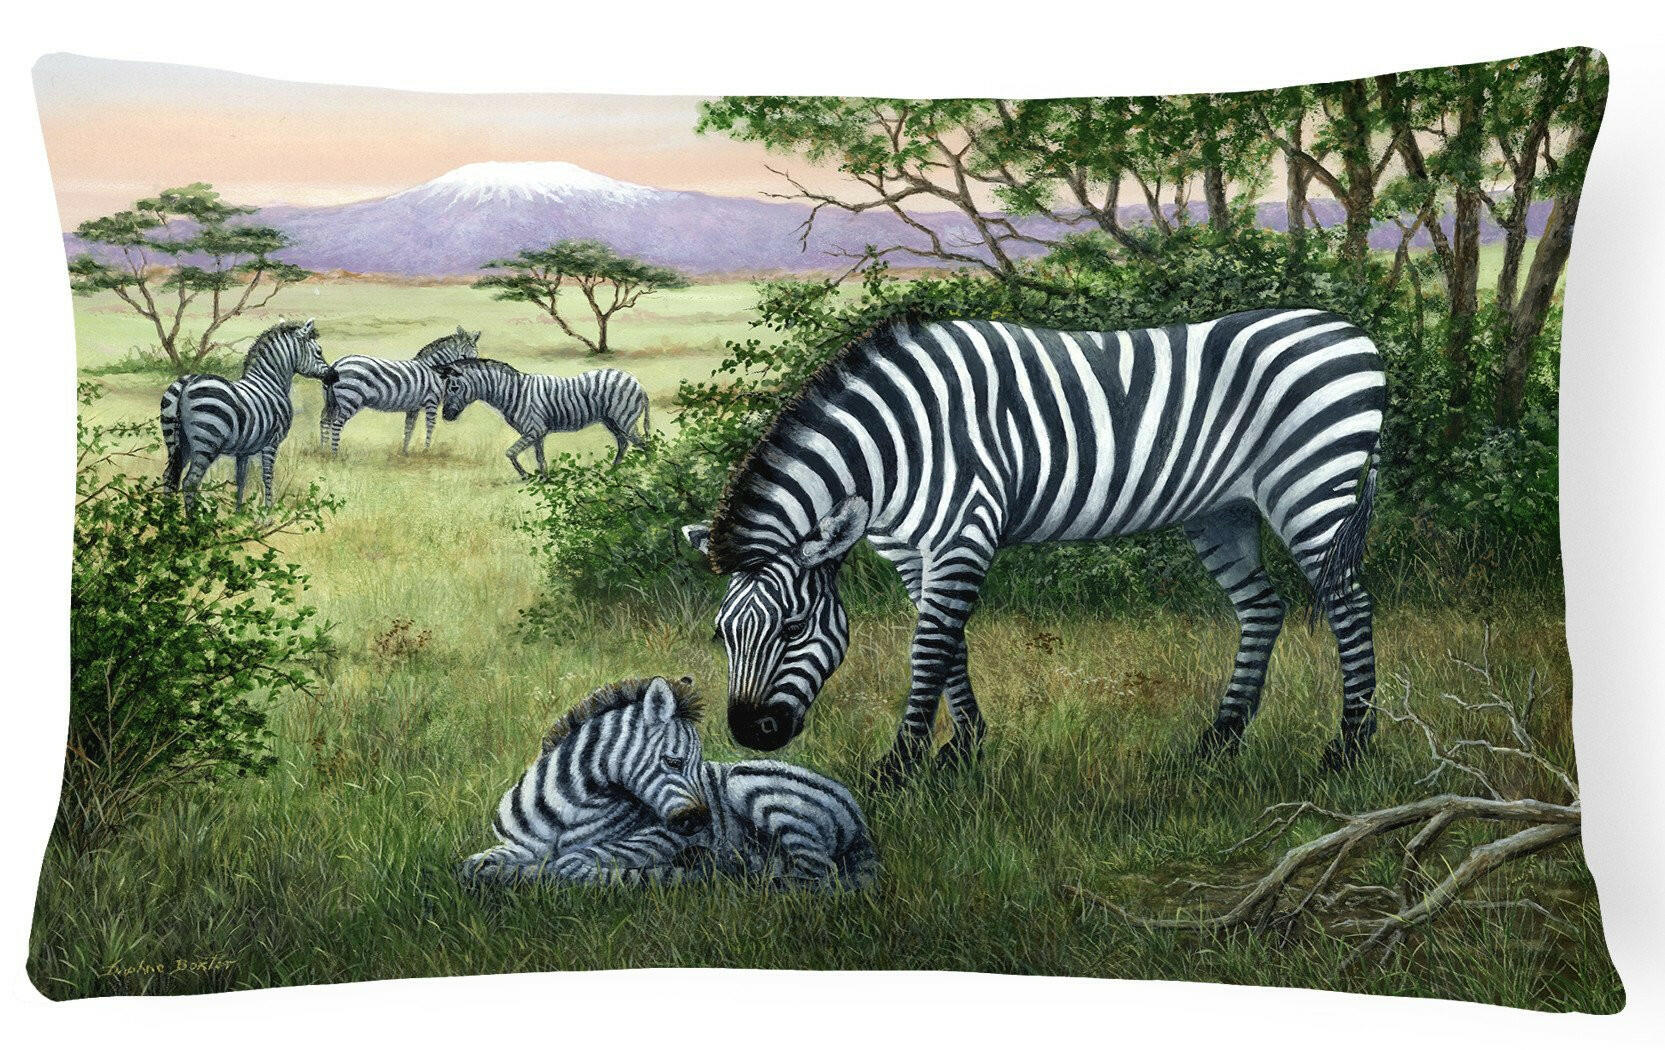 Zebras in the Field with Baby Fabric Decorative Pillow BDBA0385PW1216 by Caroline's Treasures